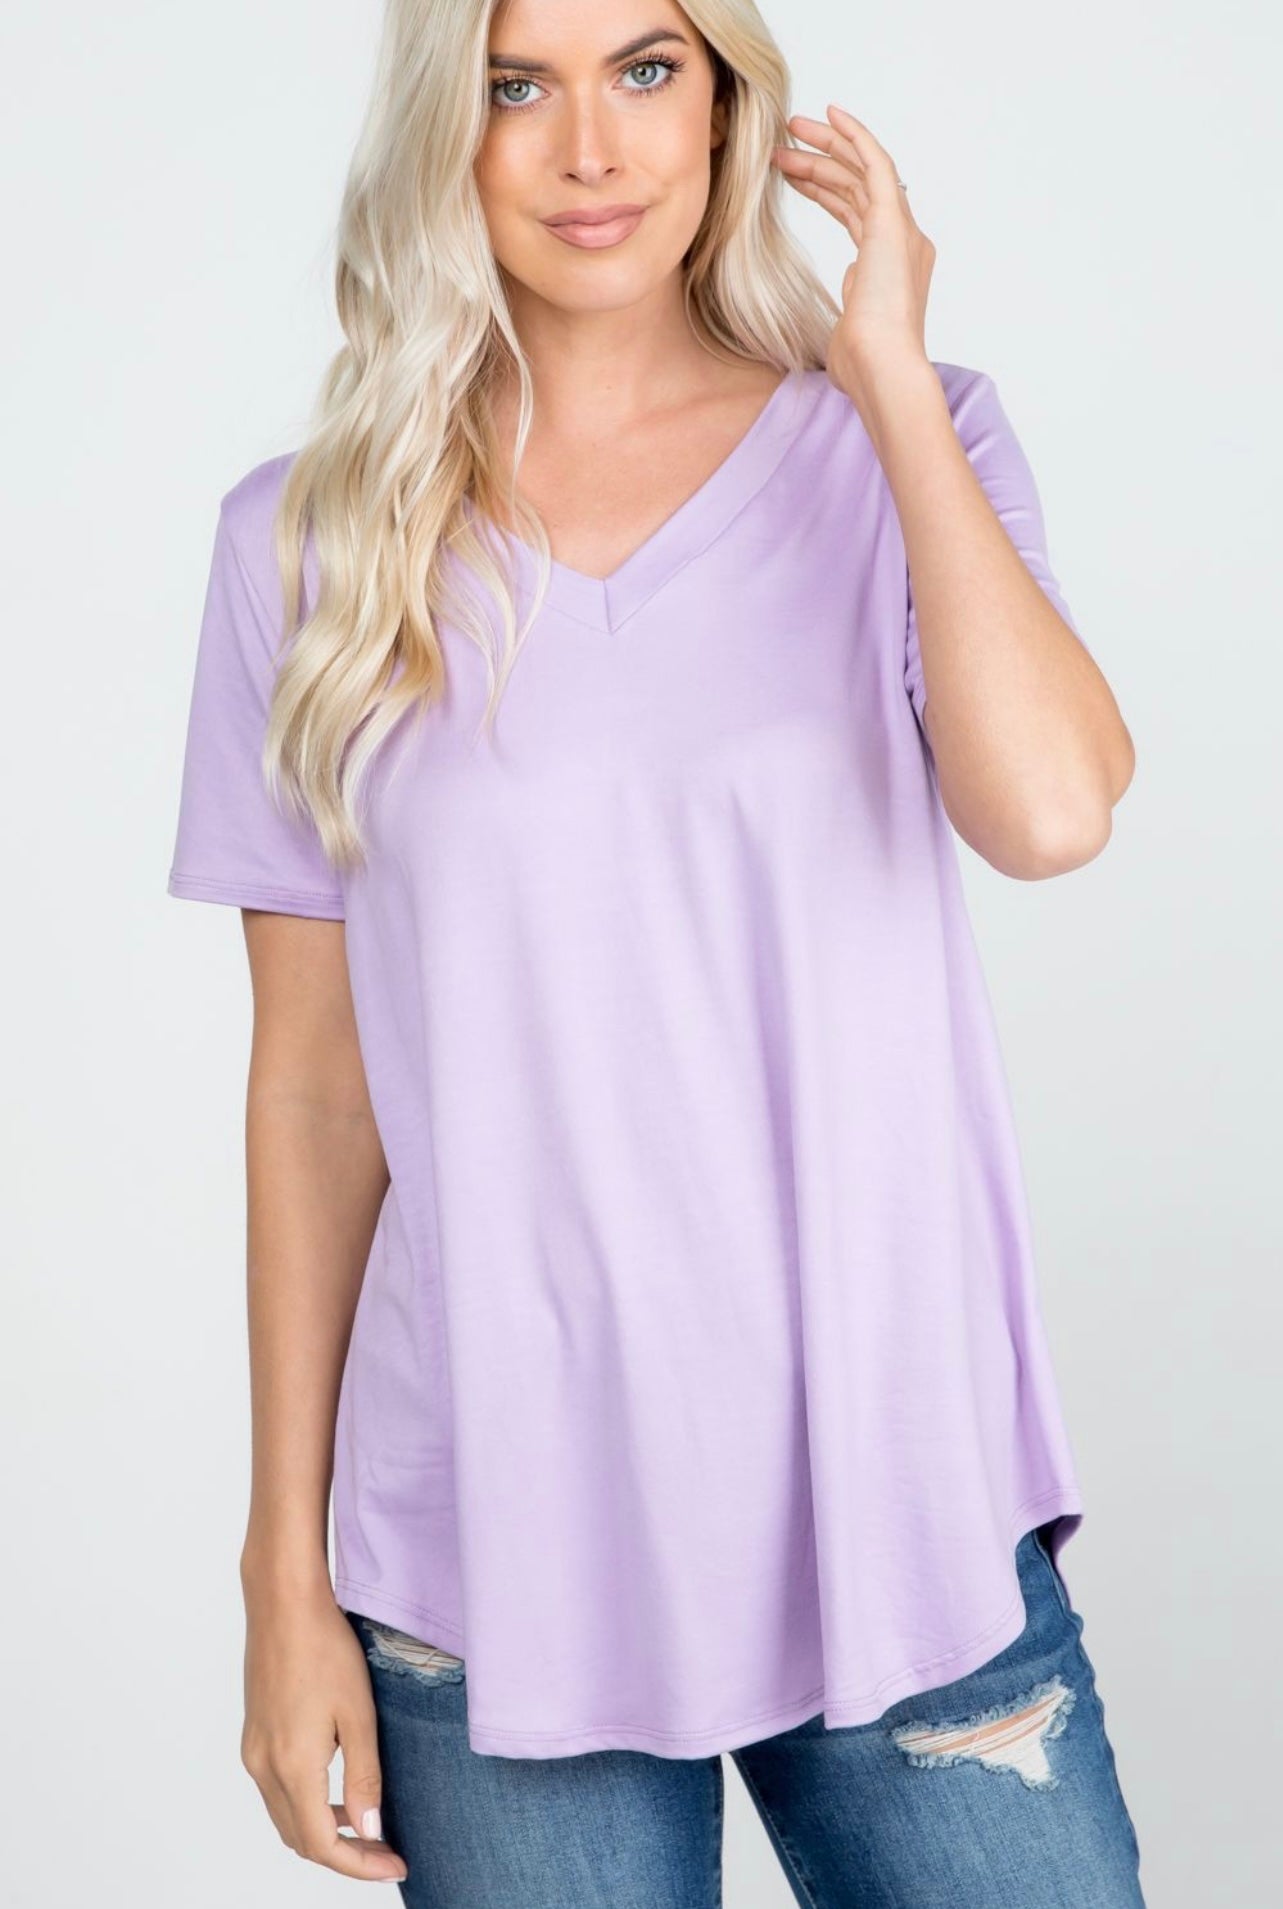 The Buttah Soft Tee in Lavender